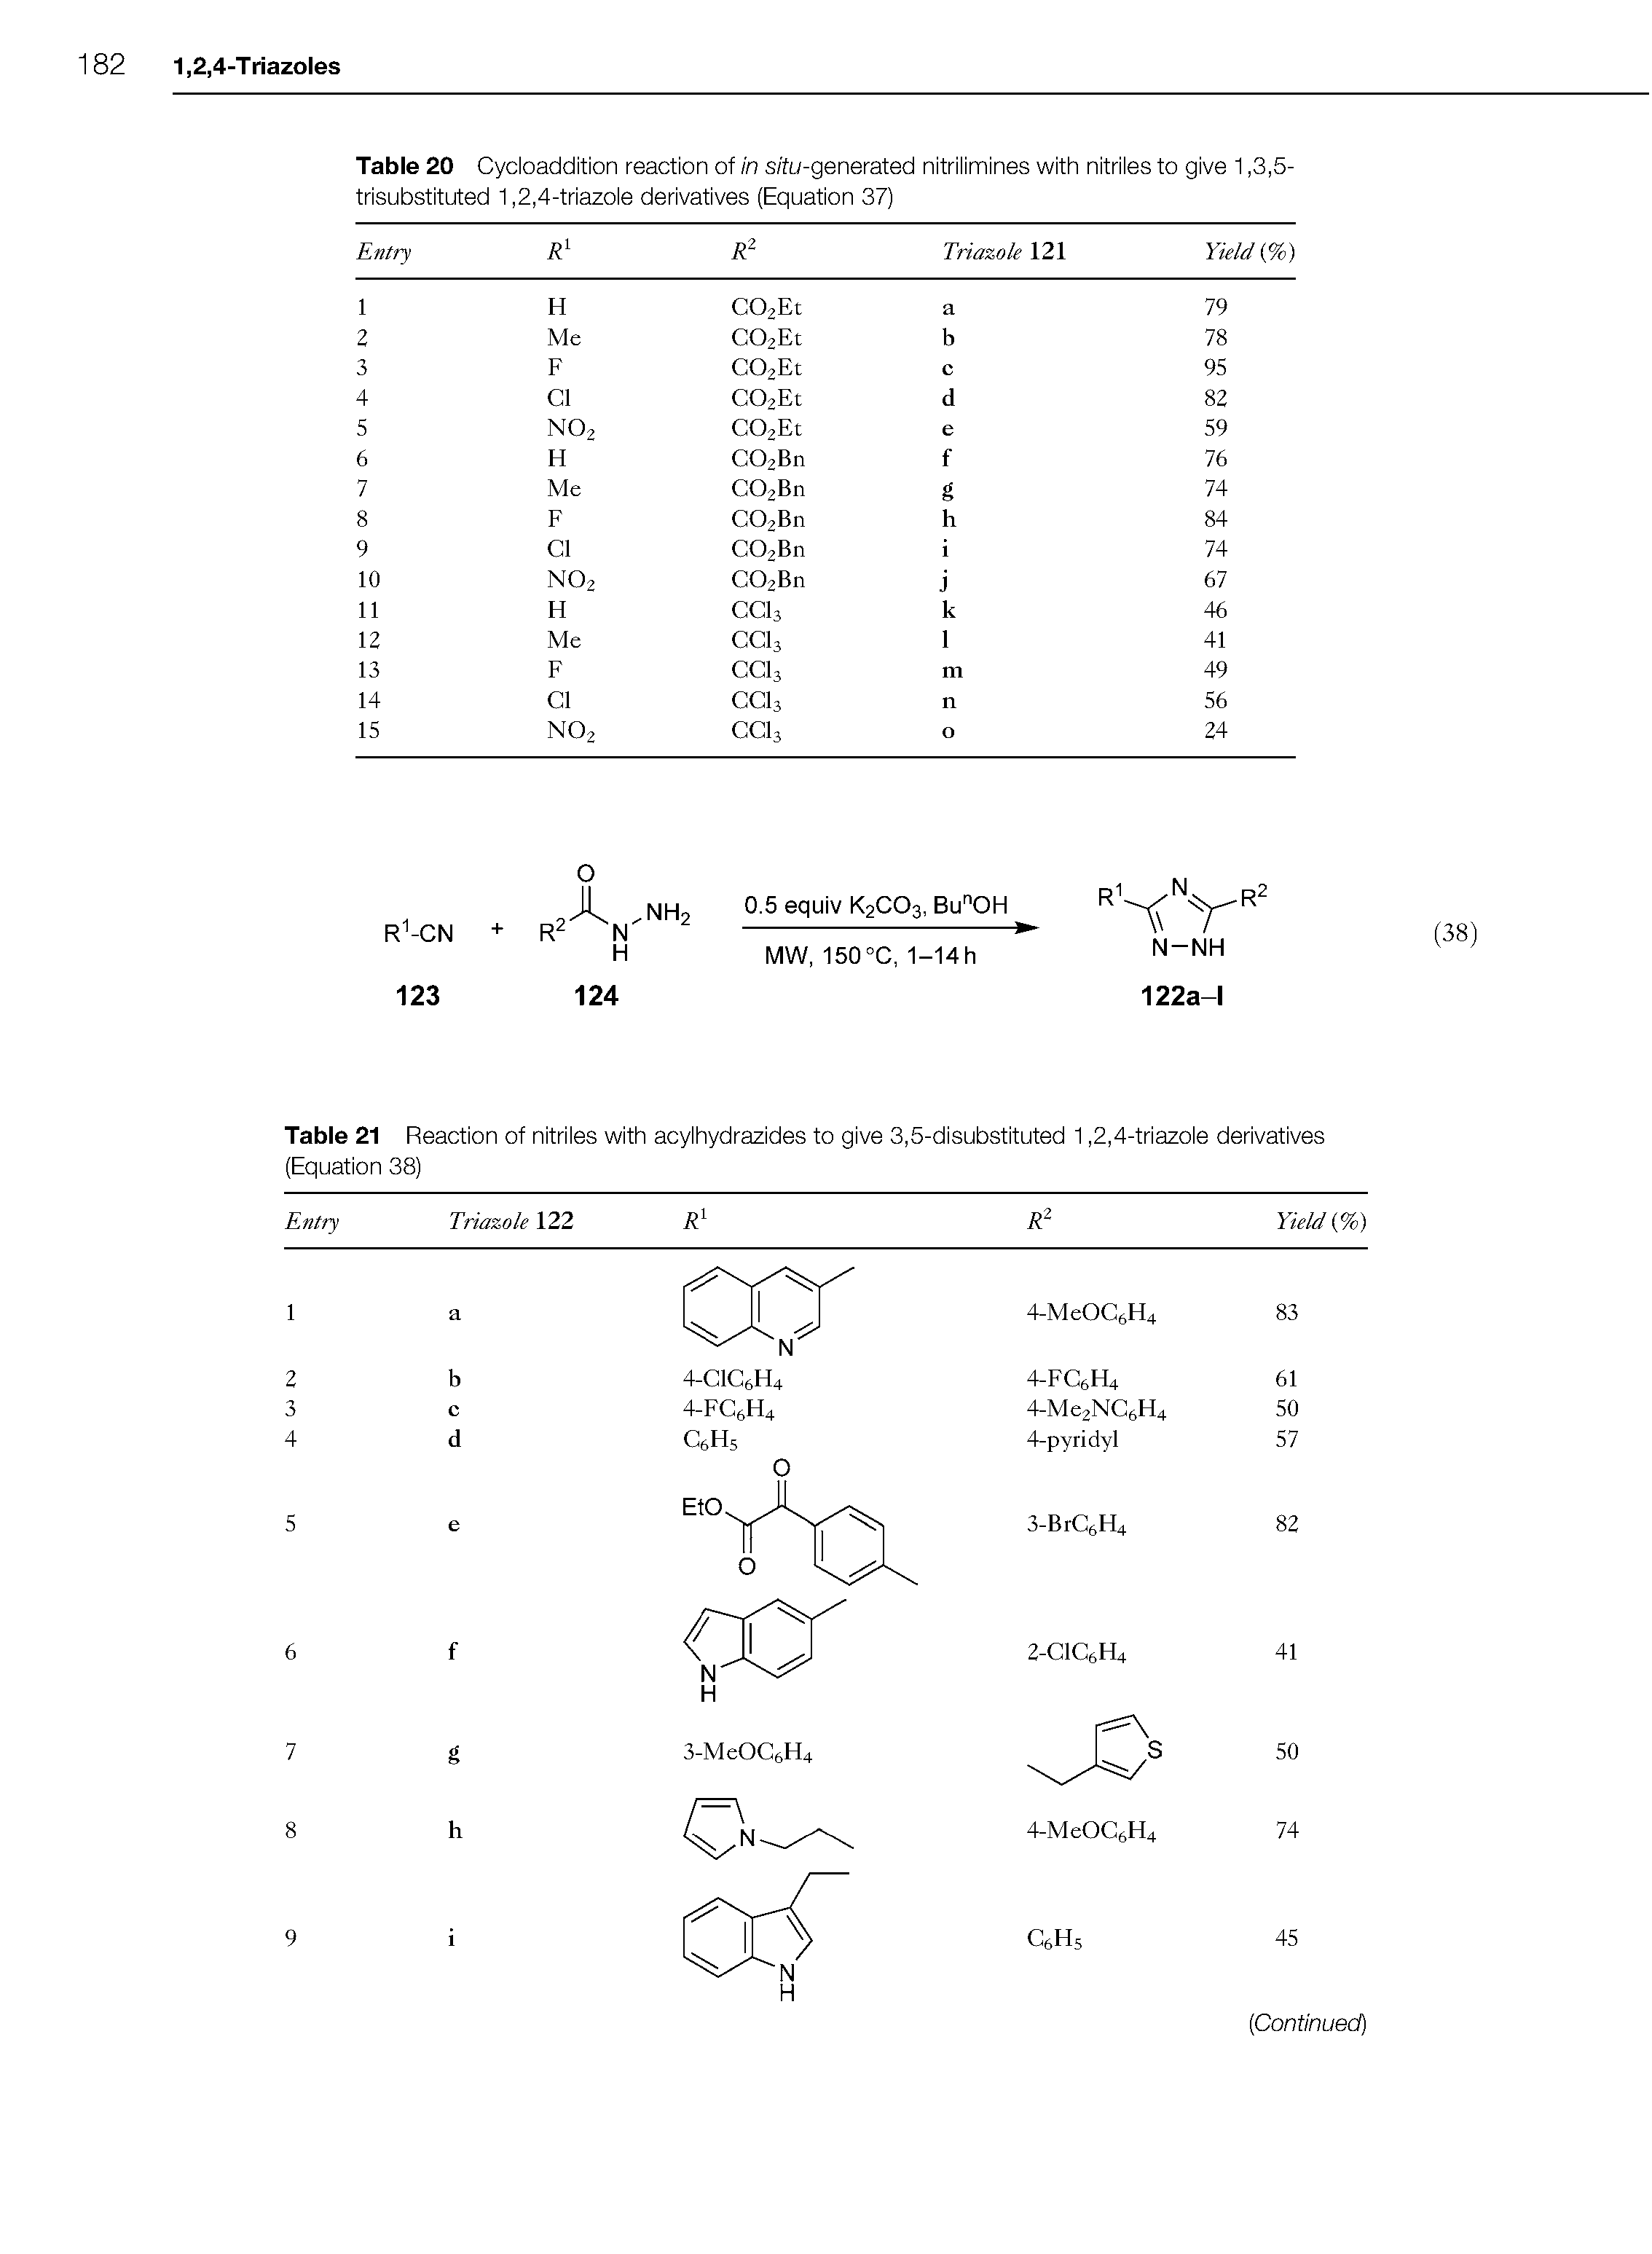 Table 20 Cycloaddition reaction of in s/ fu-generated nitrilimines with nitriles to give 1,3,5-trisubstituted 1,2,4-triazole derivatives (Equation 37)...